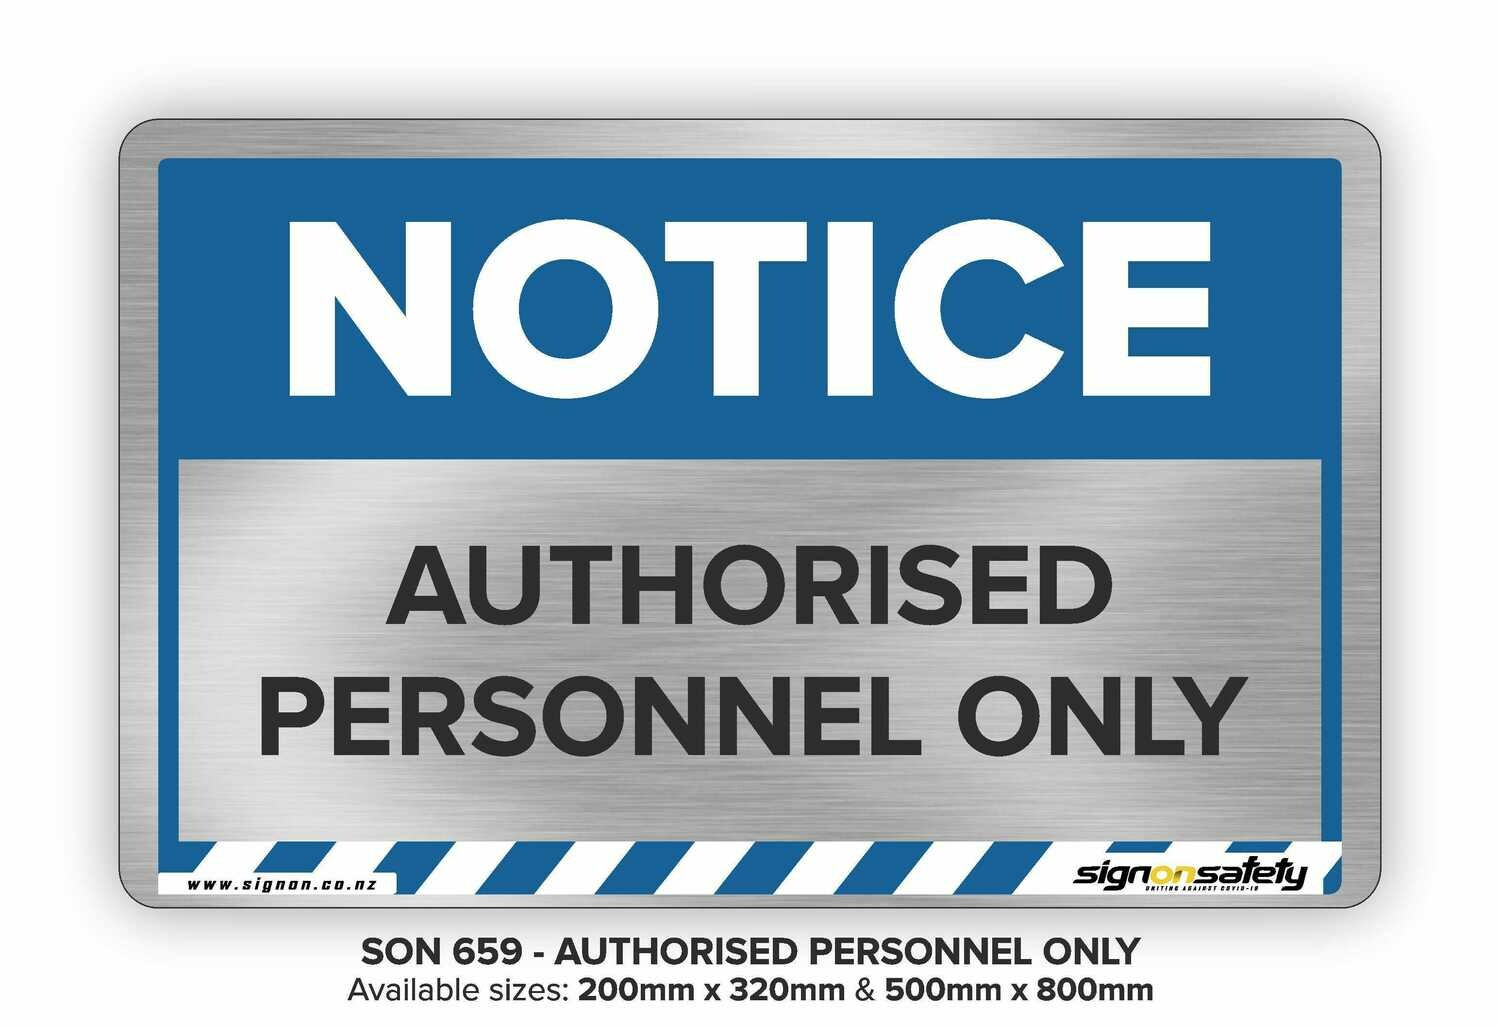 Notice - Authorised Personnel Only